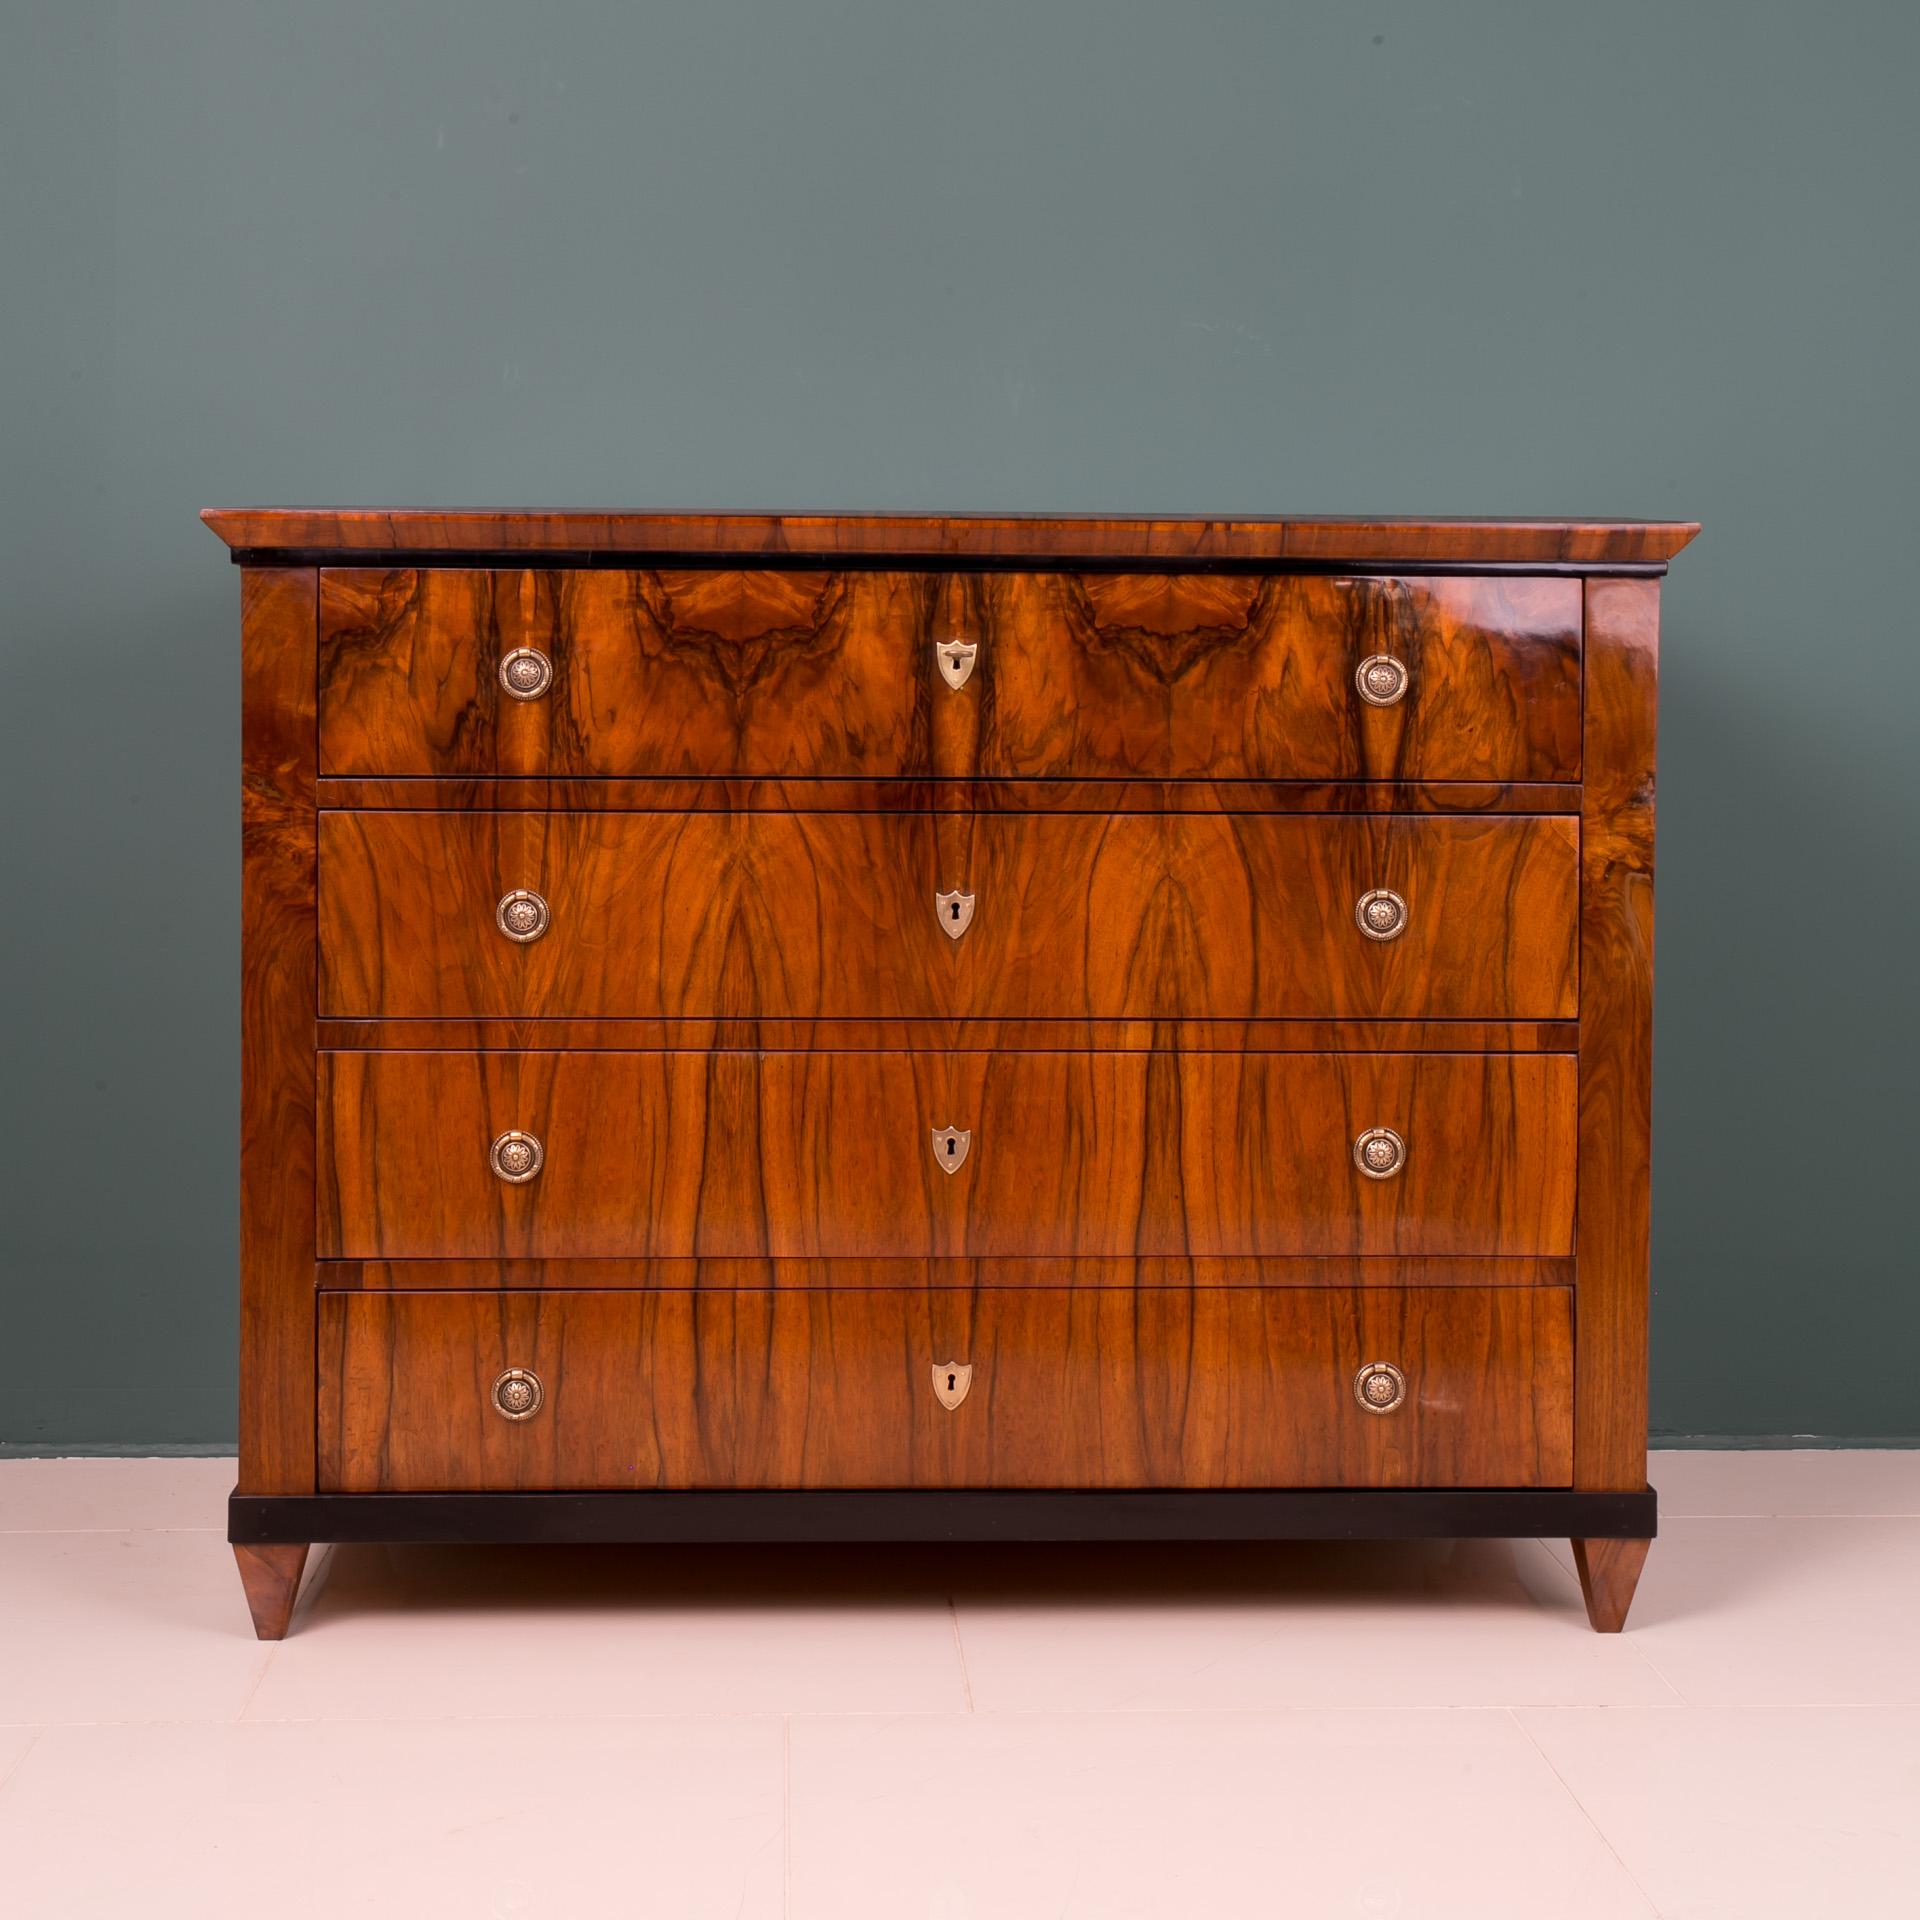 Biedermeier style chest of drawers from 19th century, circa 1830s. This piece of furniture comes from Germany. It was made of coniferous wood and veneered with beautiful walnut wood. It features 4 spacious drawers. The chest of drawers has undergone